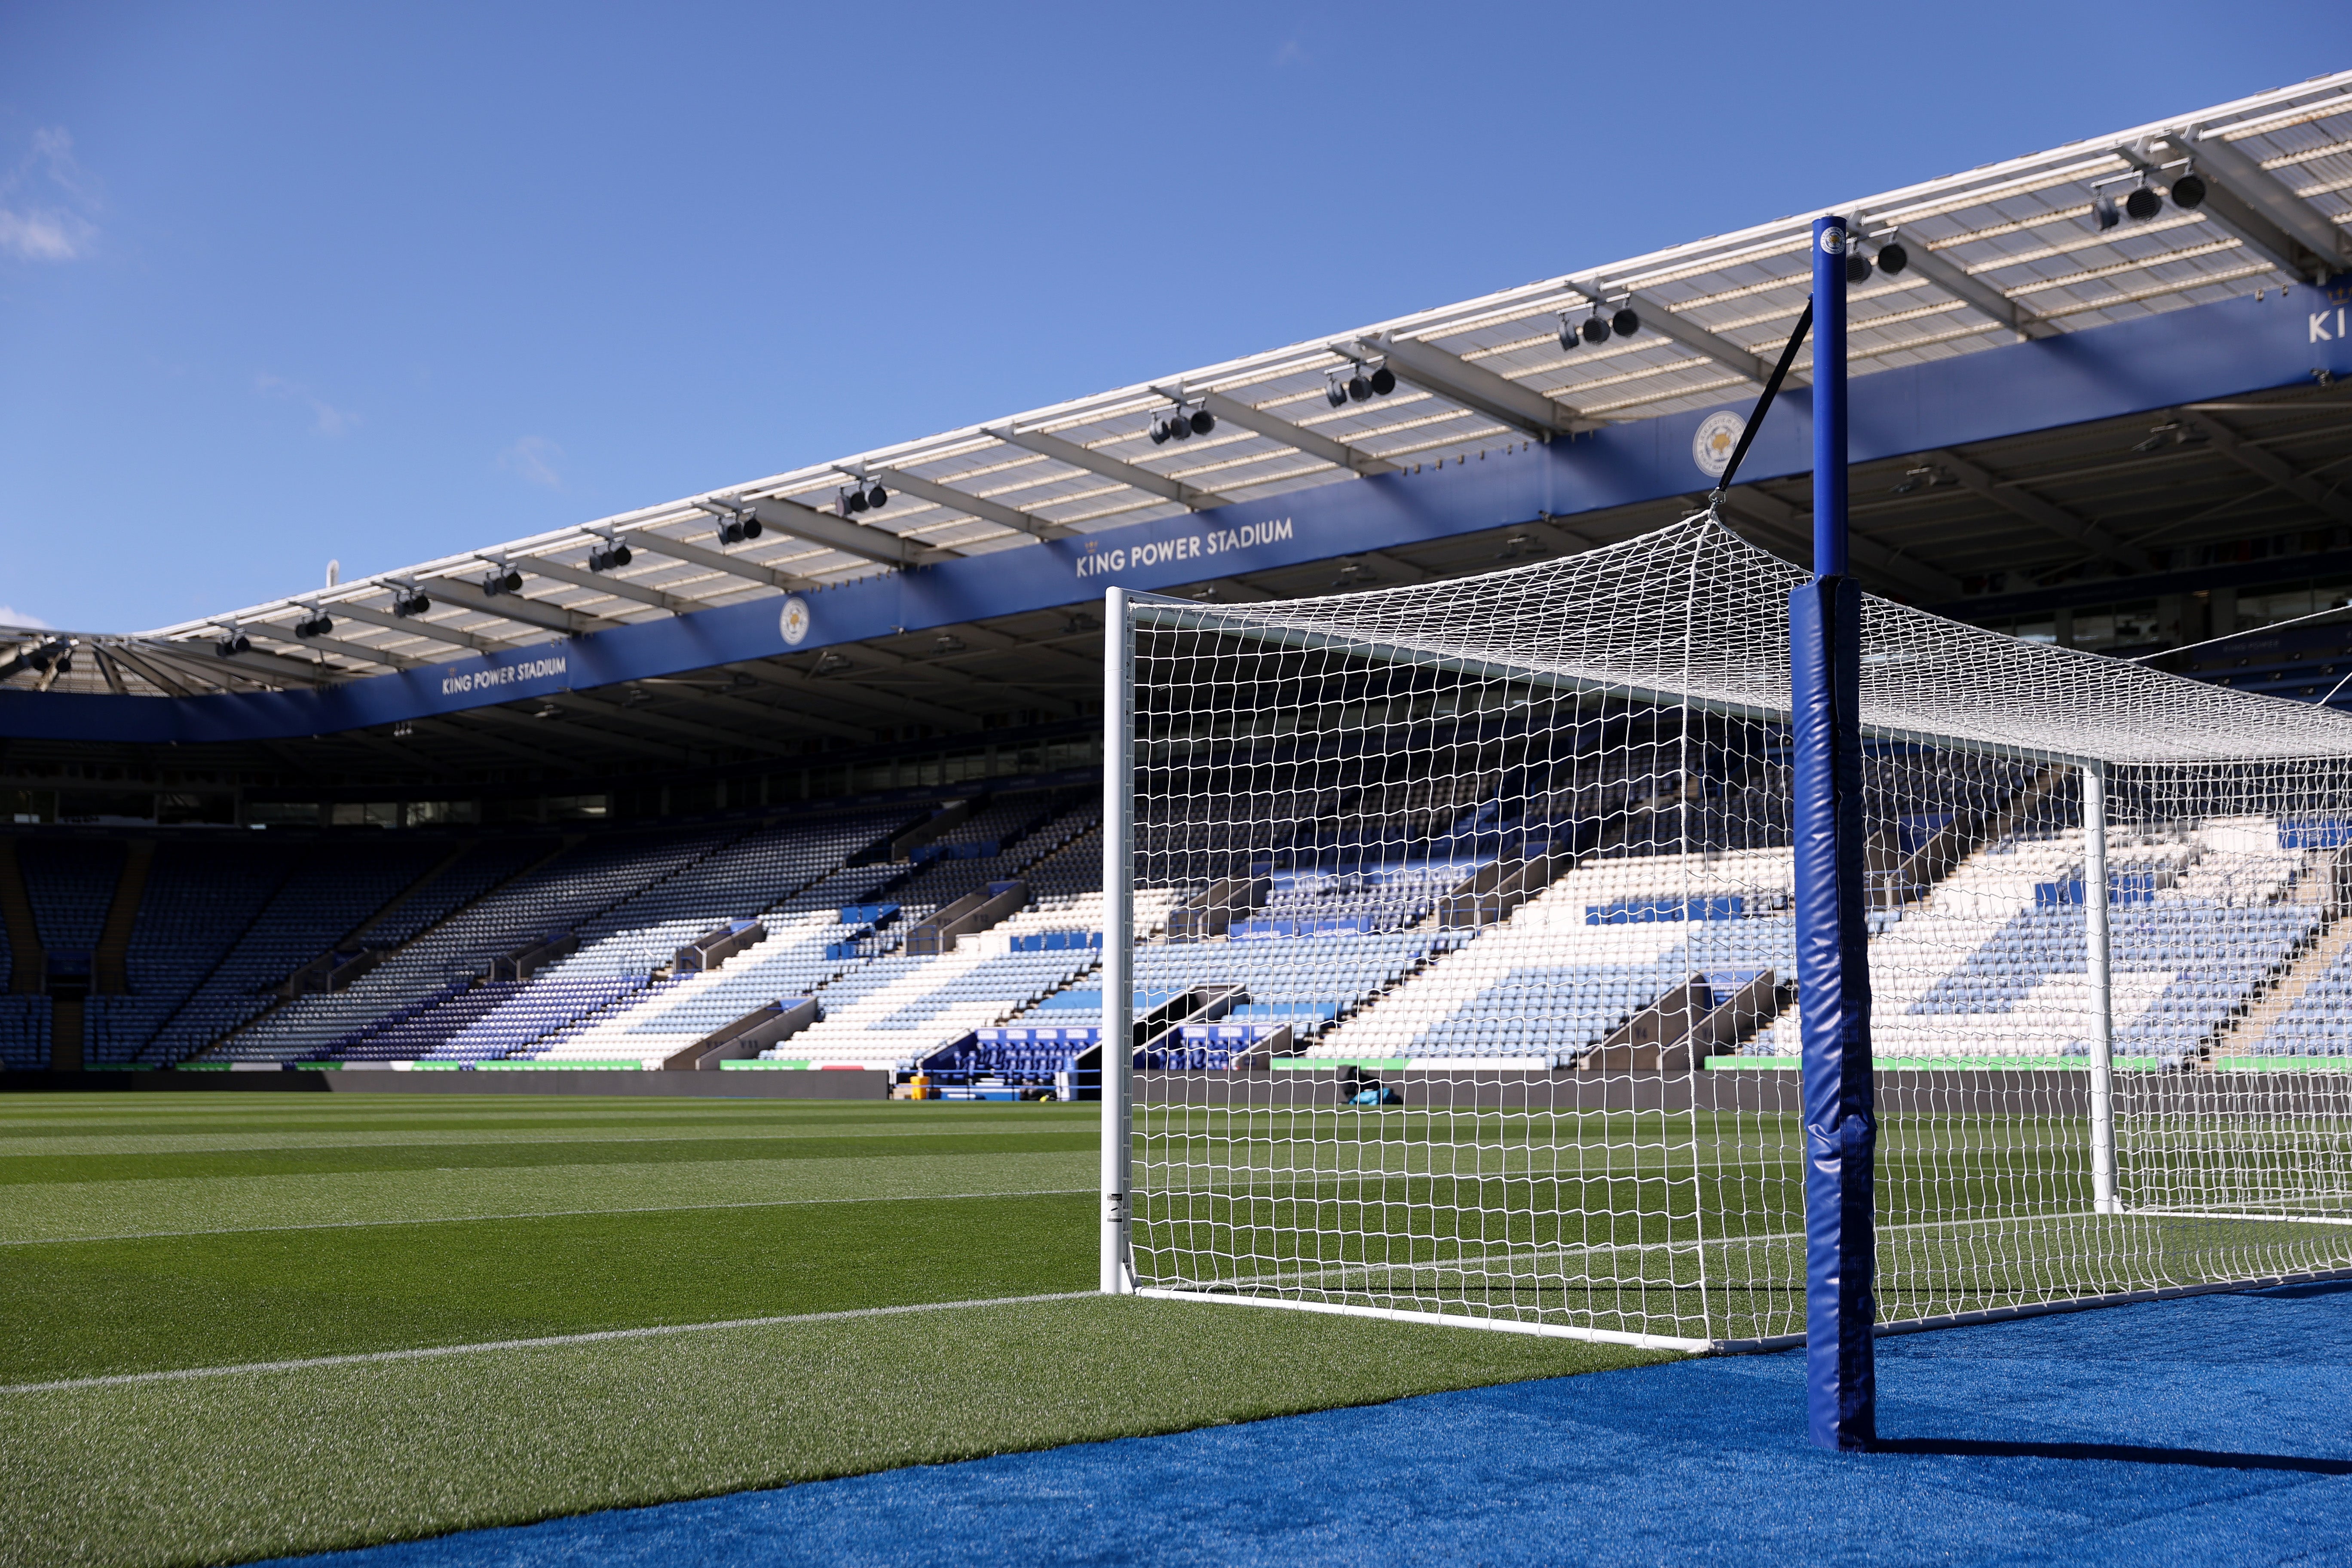 A general view of the King Power Stadium